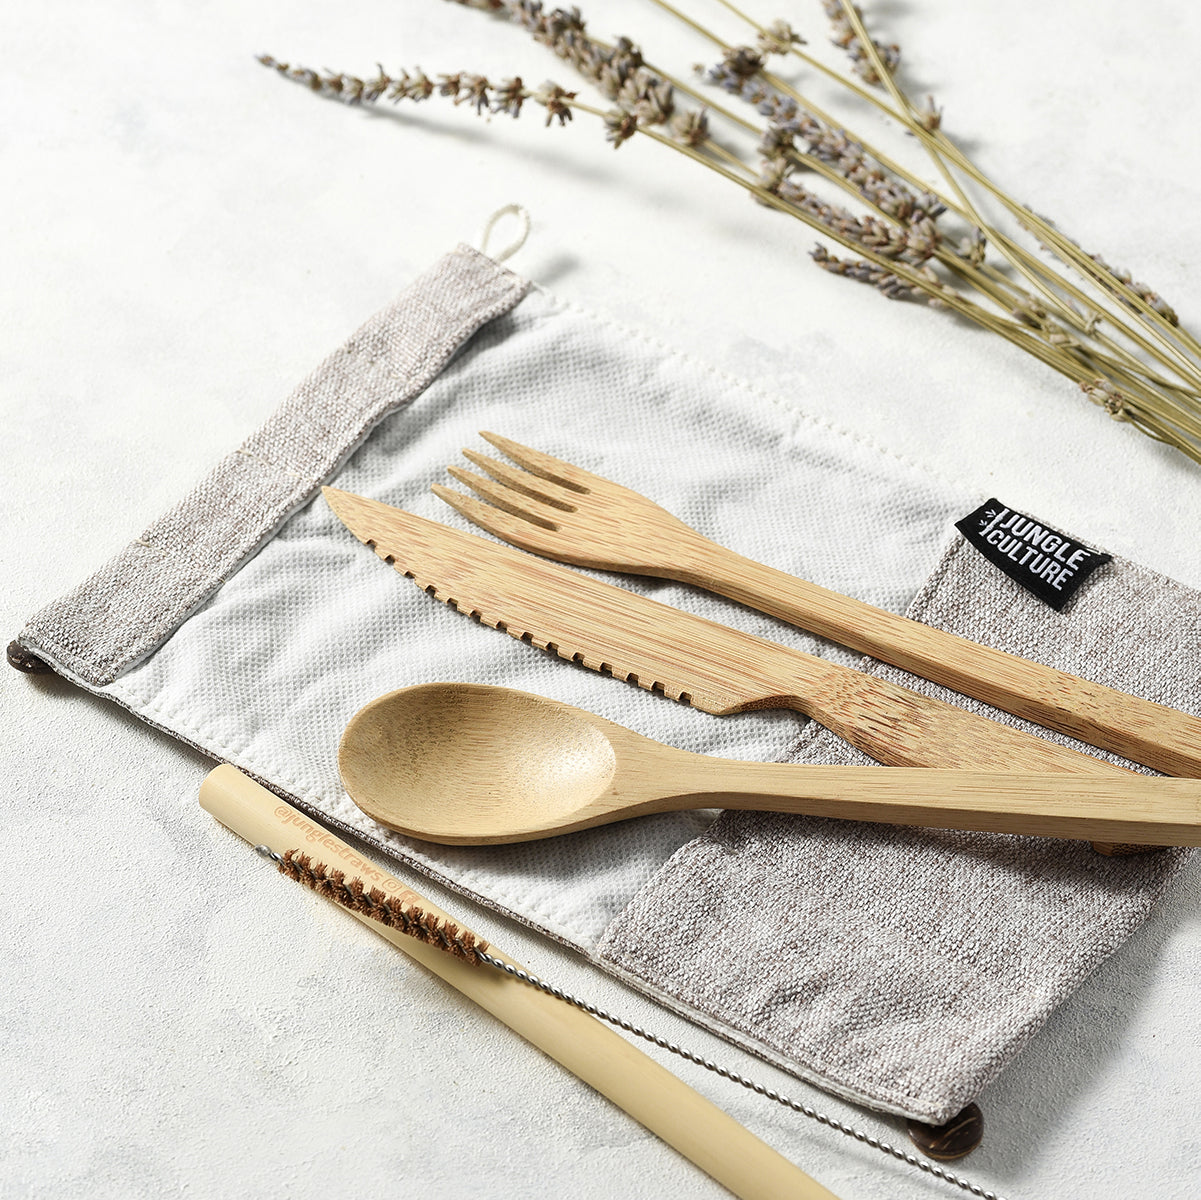 How to clean bamboo cutlery